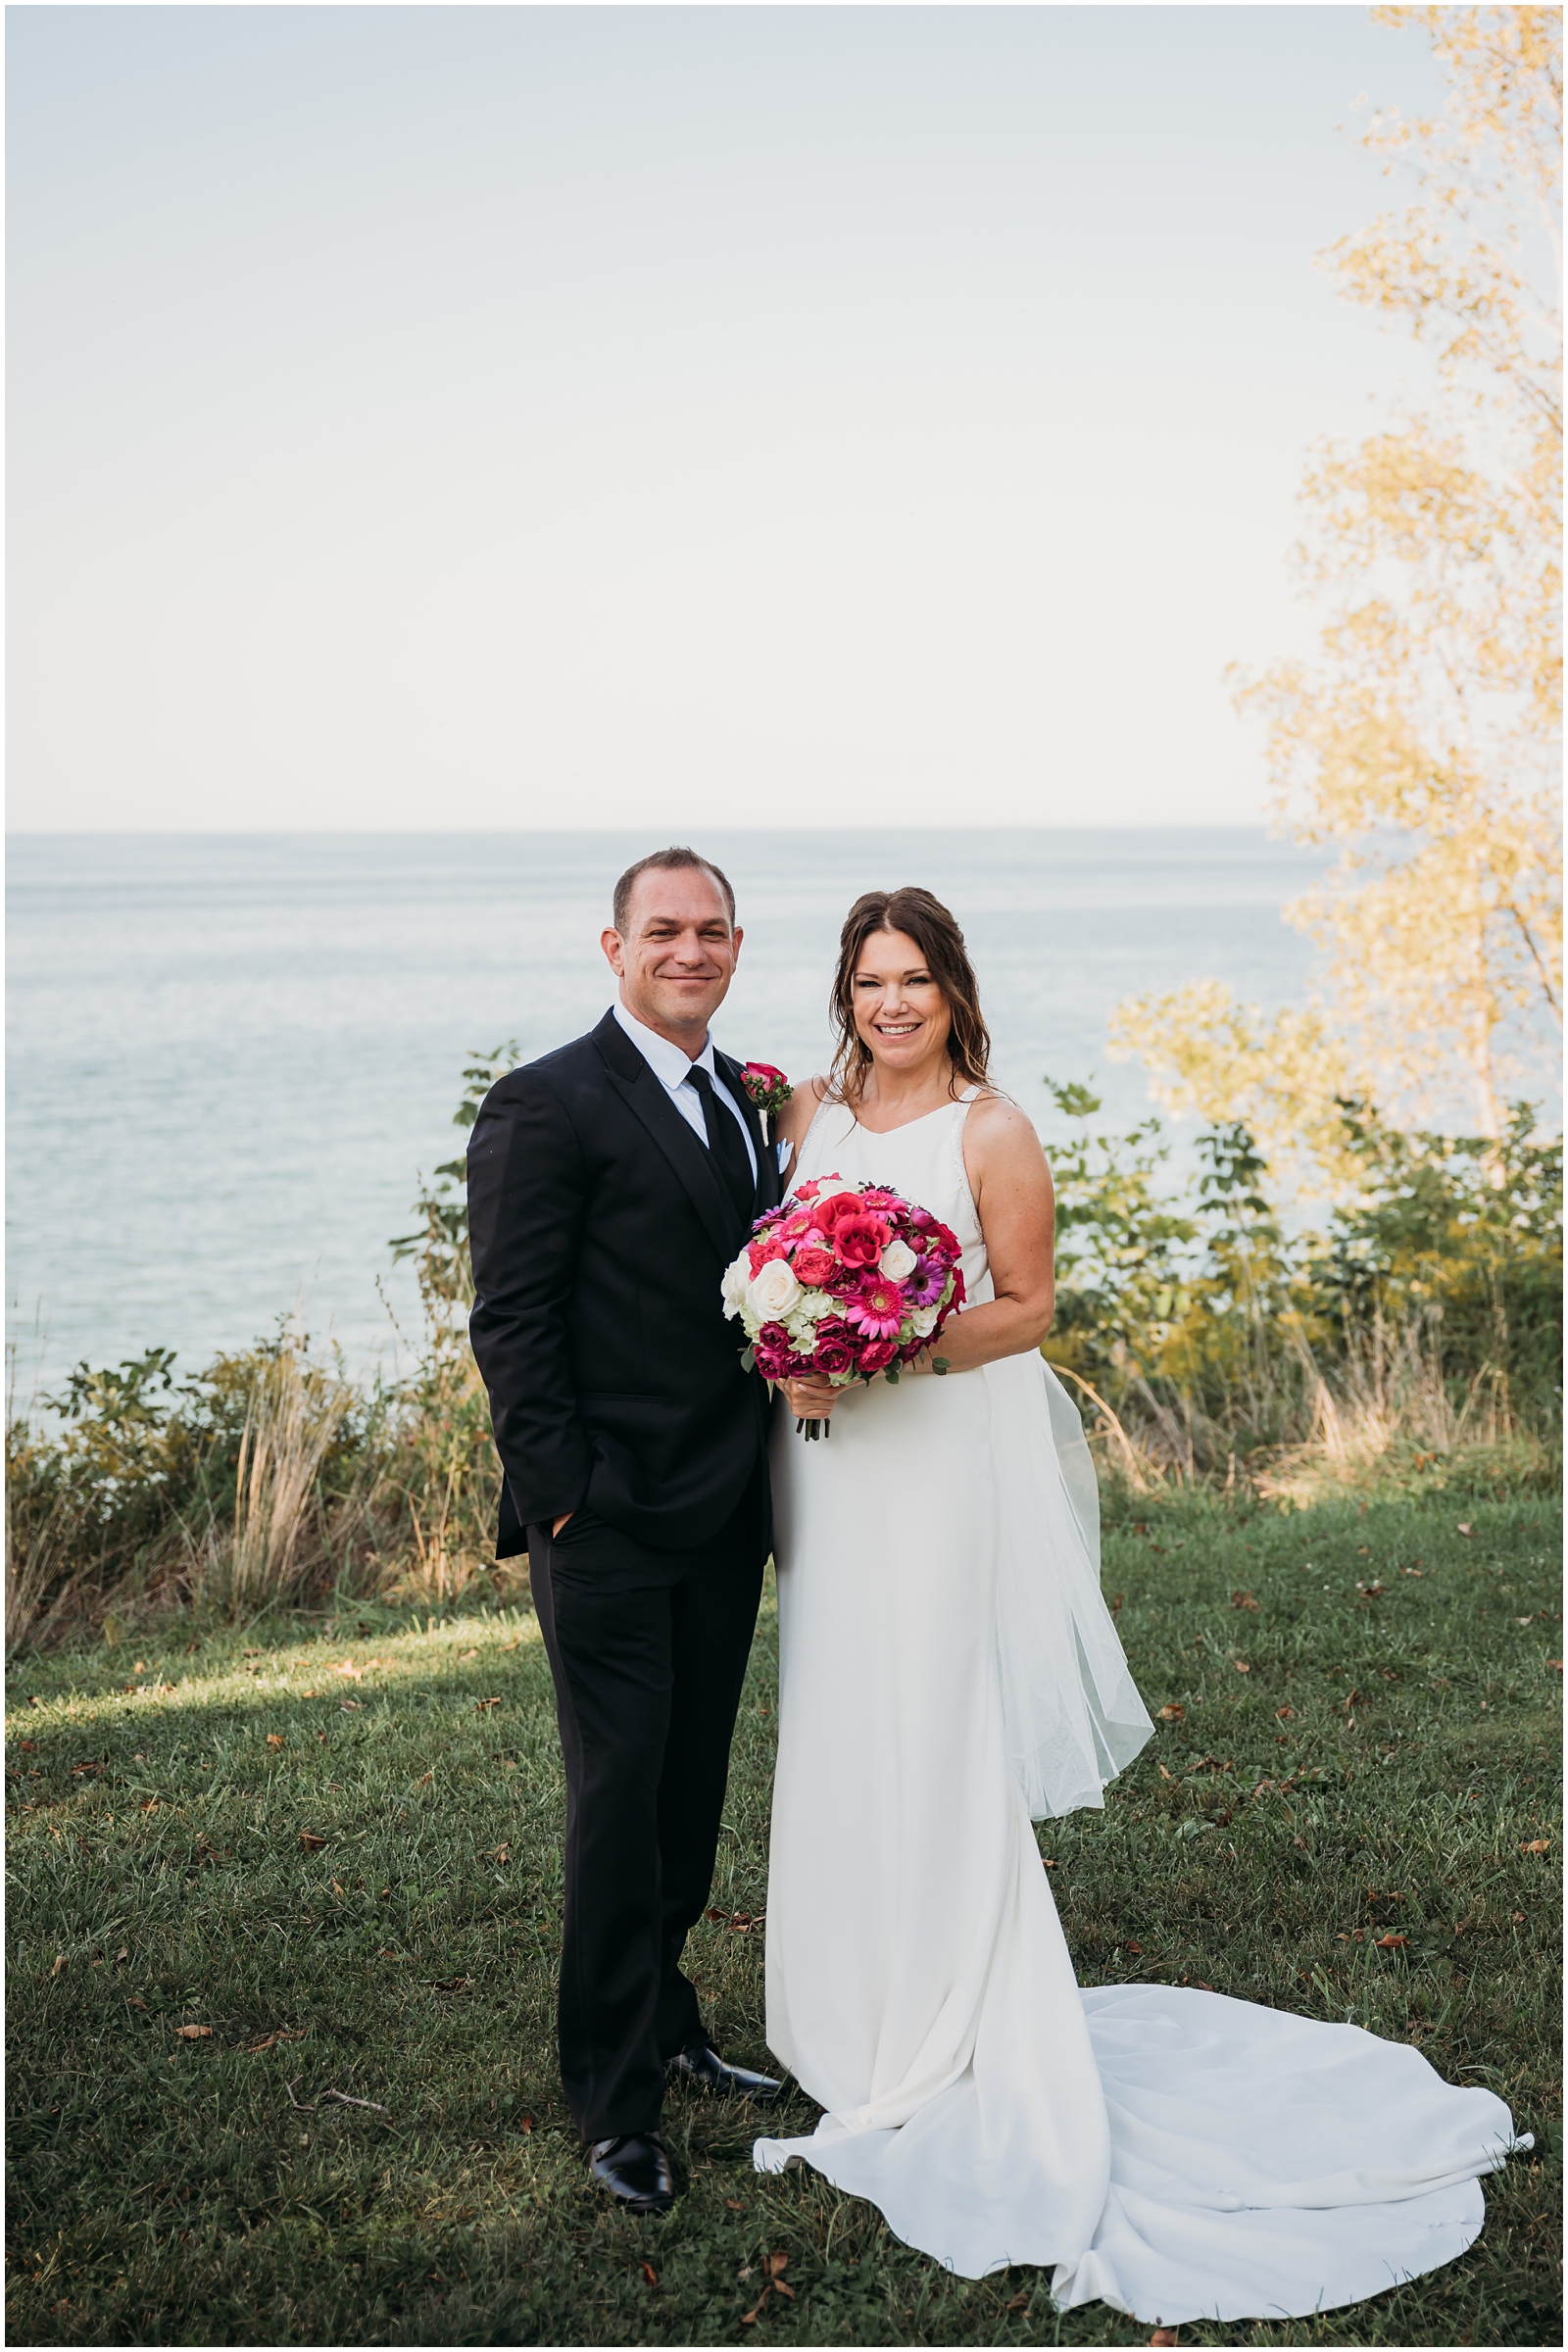 Fall Wedding at The Everly